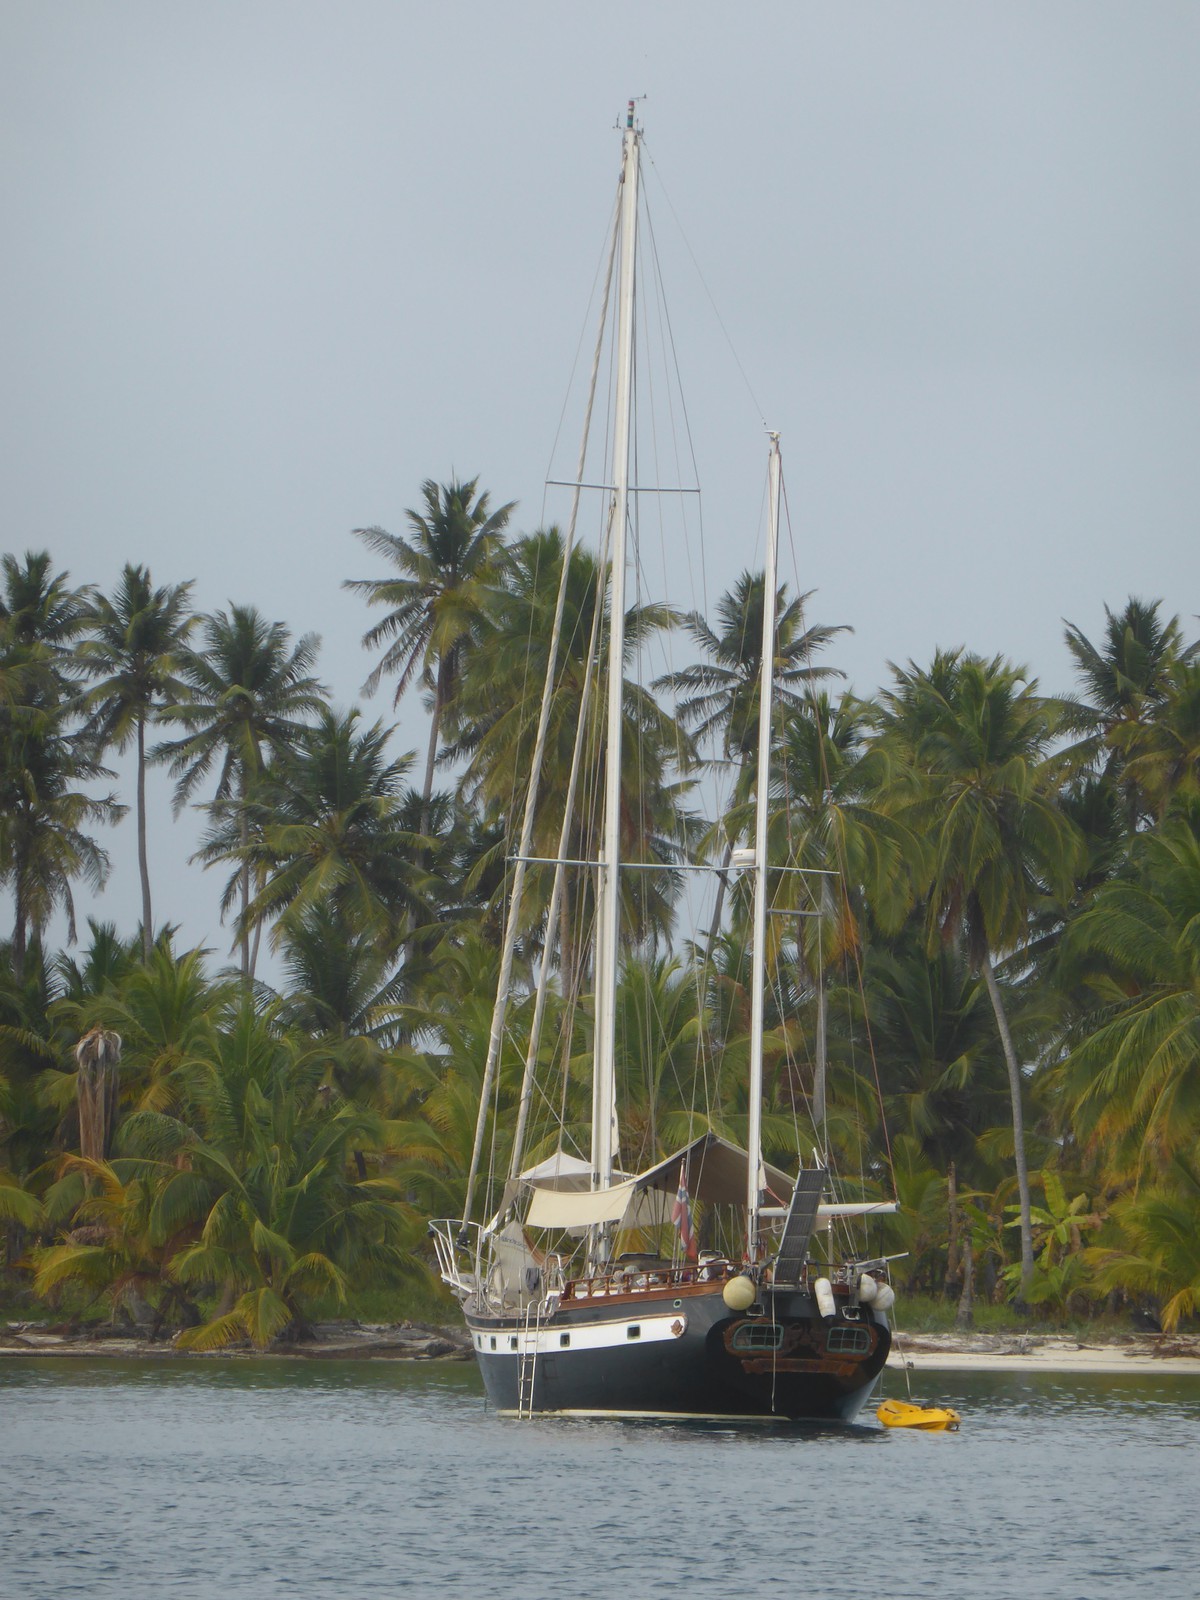 The Black Dragonfly at anchor in the Cayos Holandeses